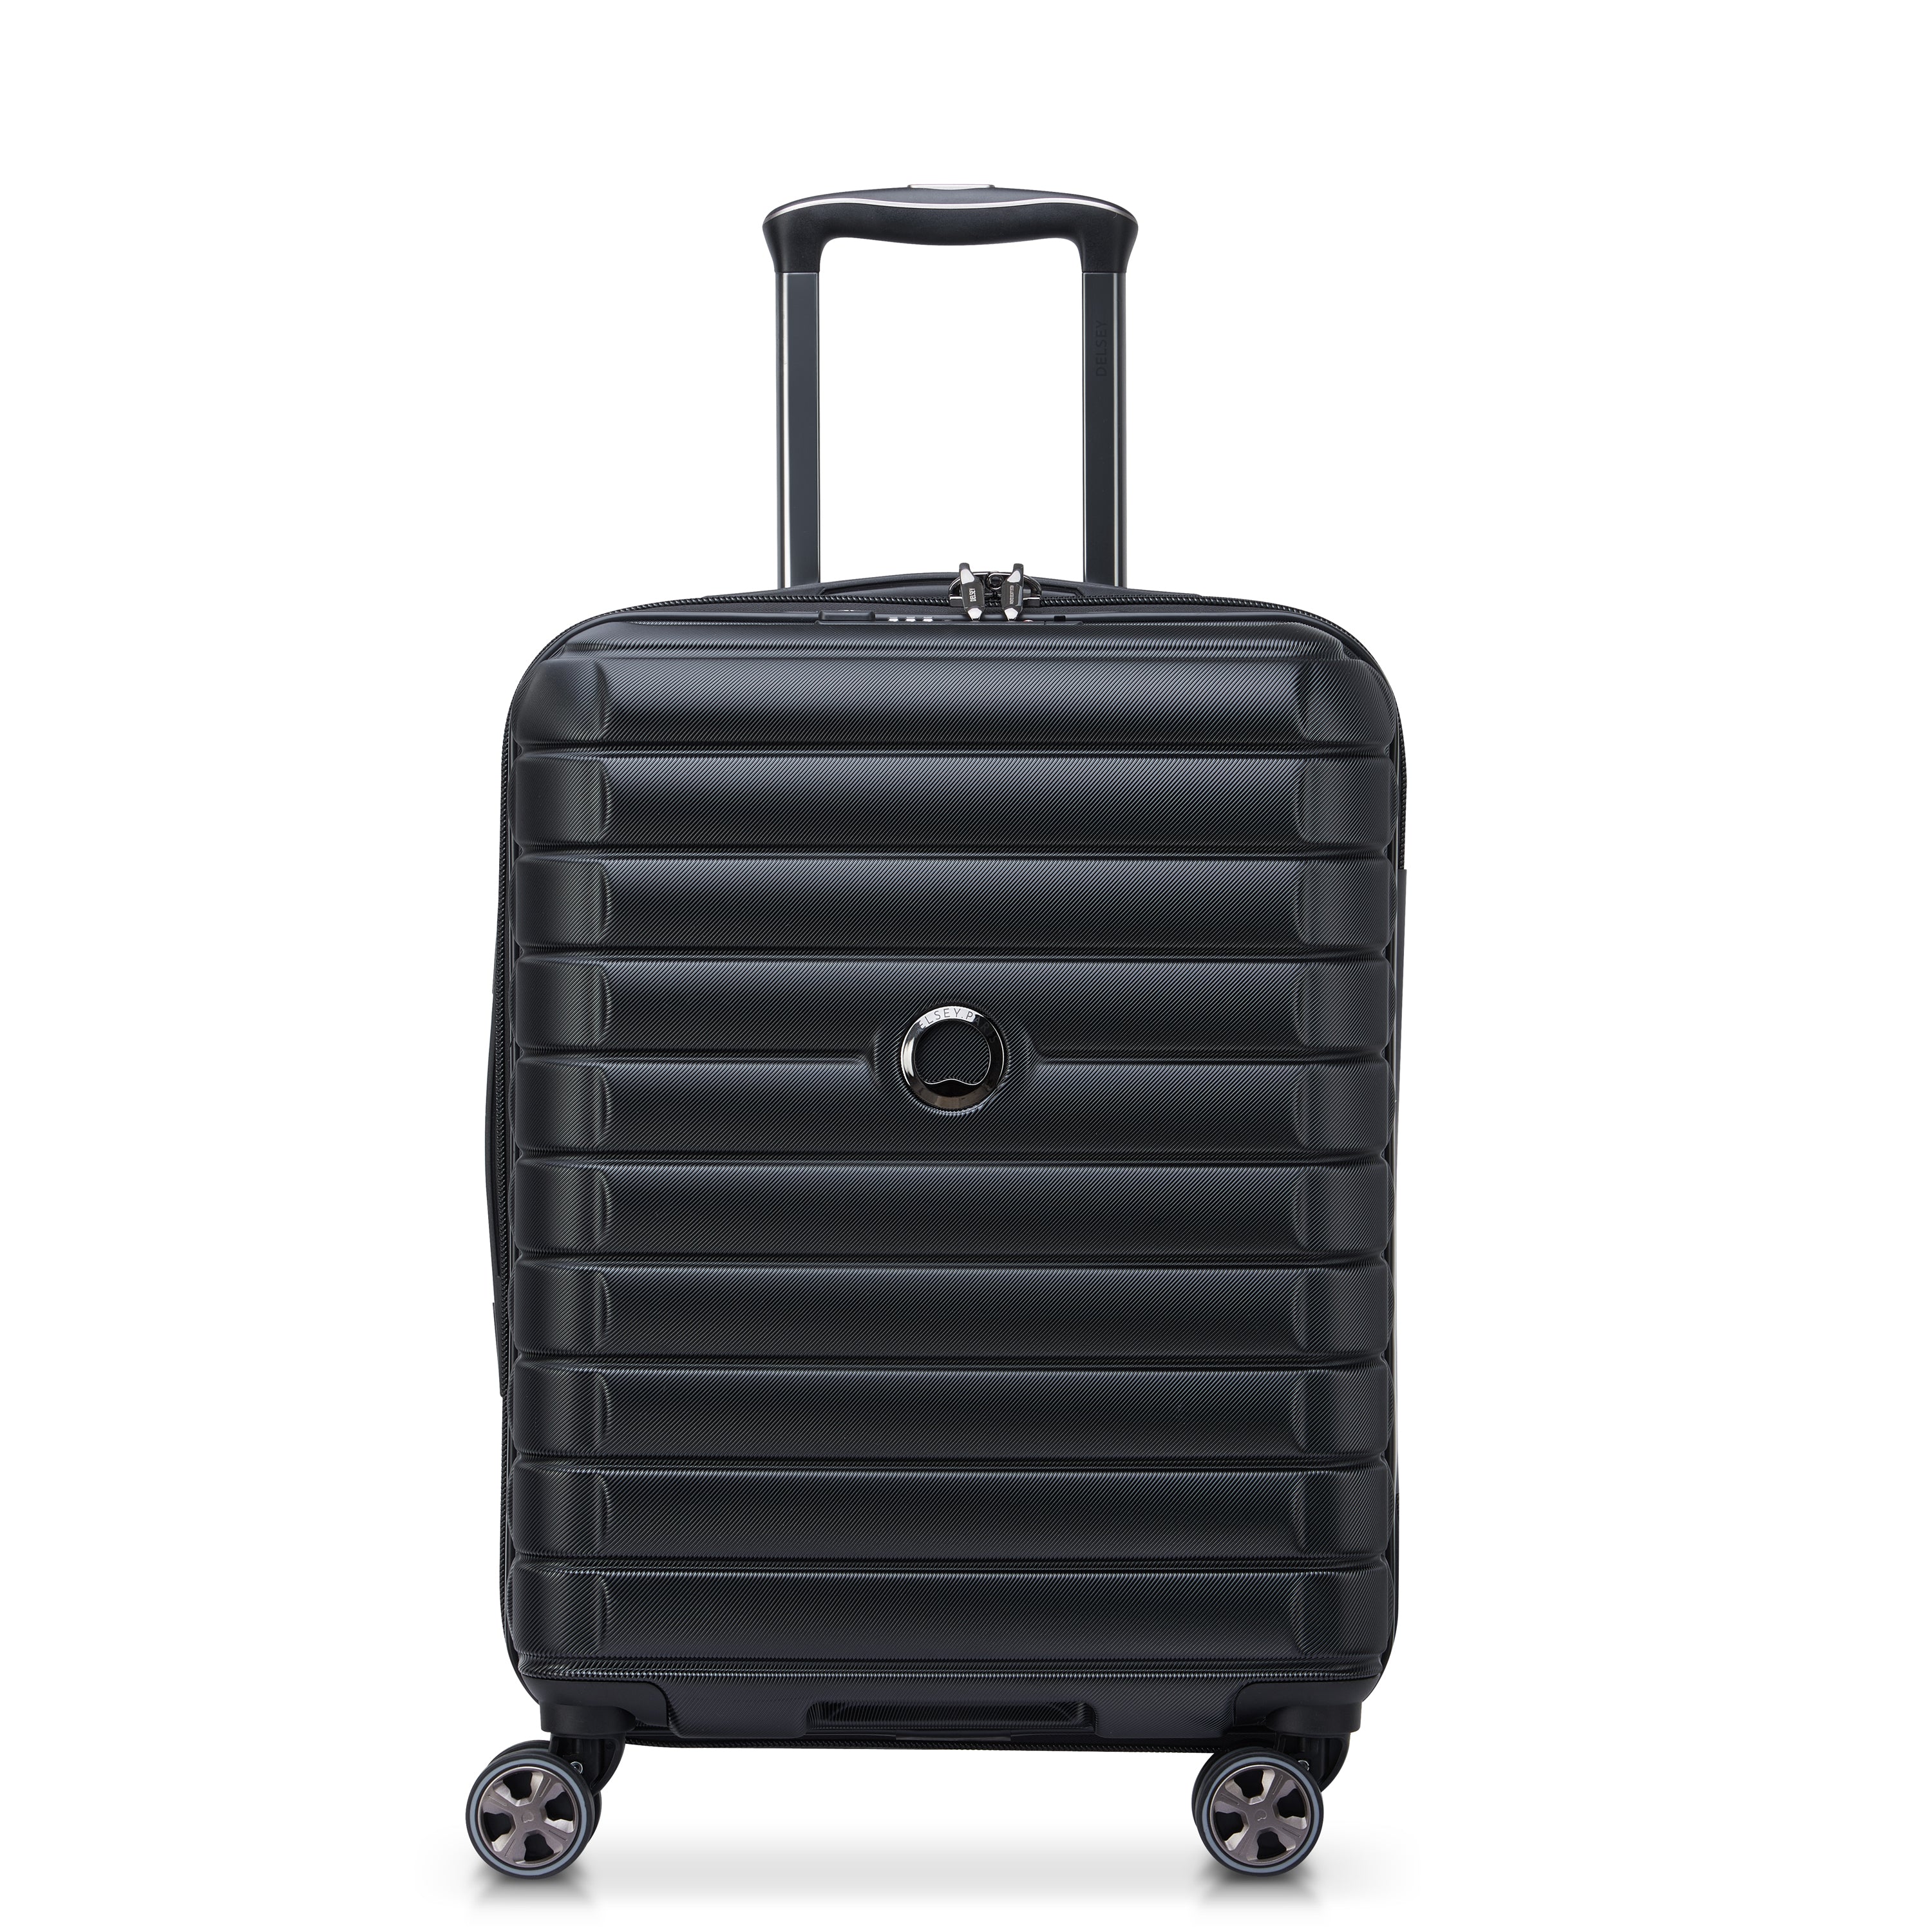 Large Collapsible Foldable Suitcase with Spinner Wheels Expandable Rolling Luggage Bag Carry on Wheeled Suit Case Maletas de Viaje Para Grandes Con